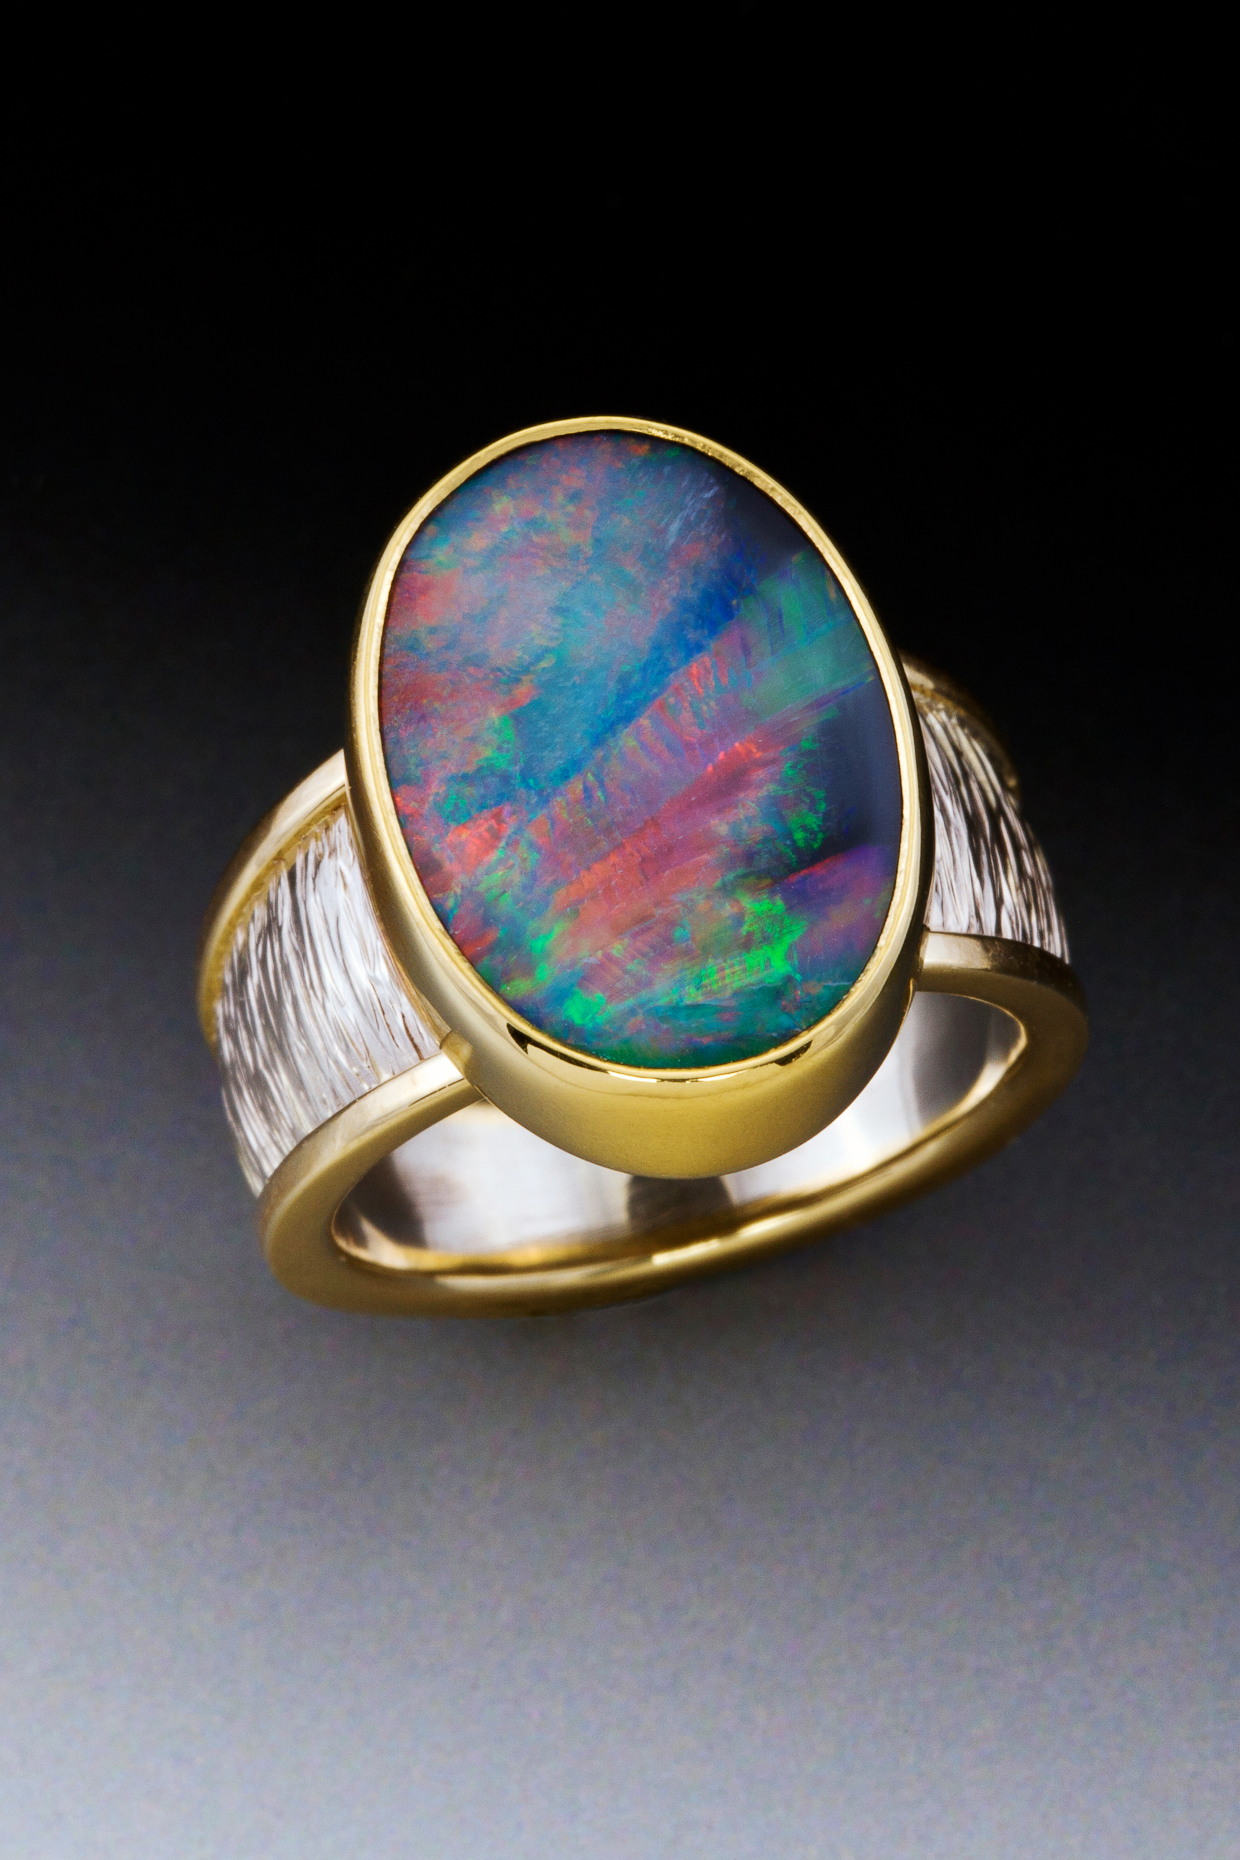 Custom ring by craftsman, artisan and metalsmith, Todd Tychewicz